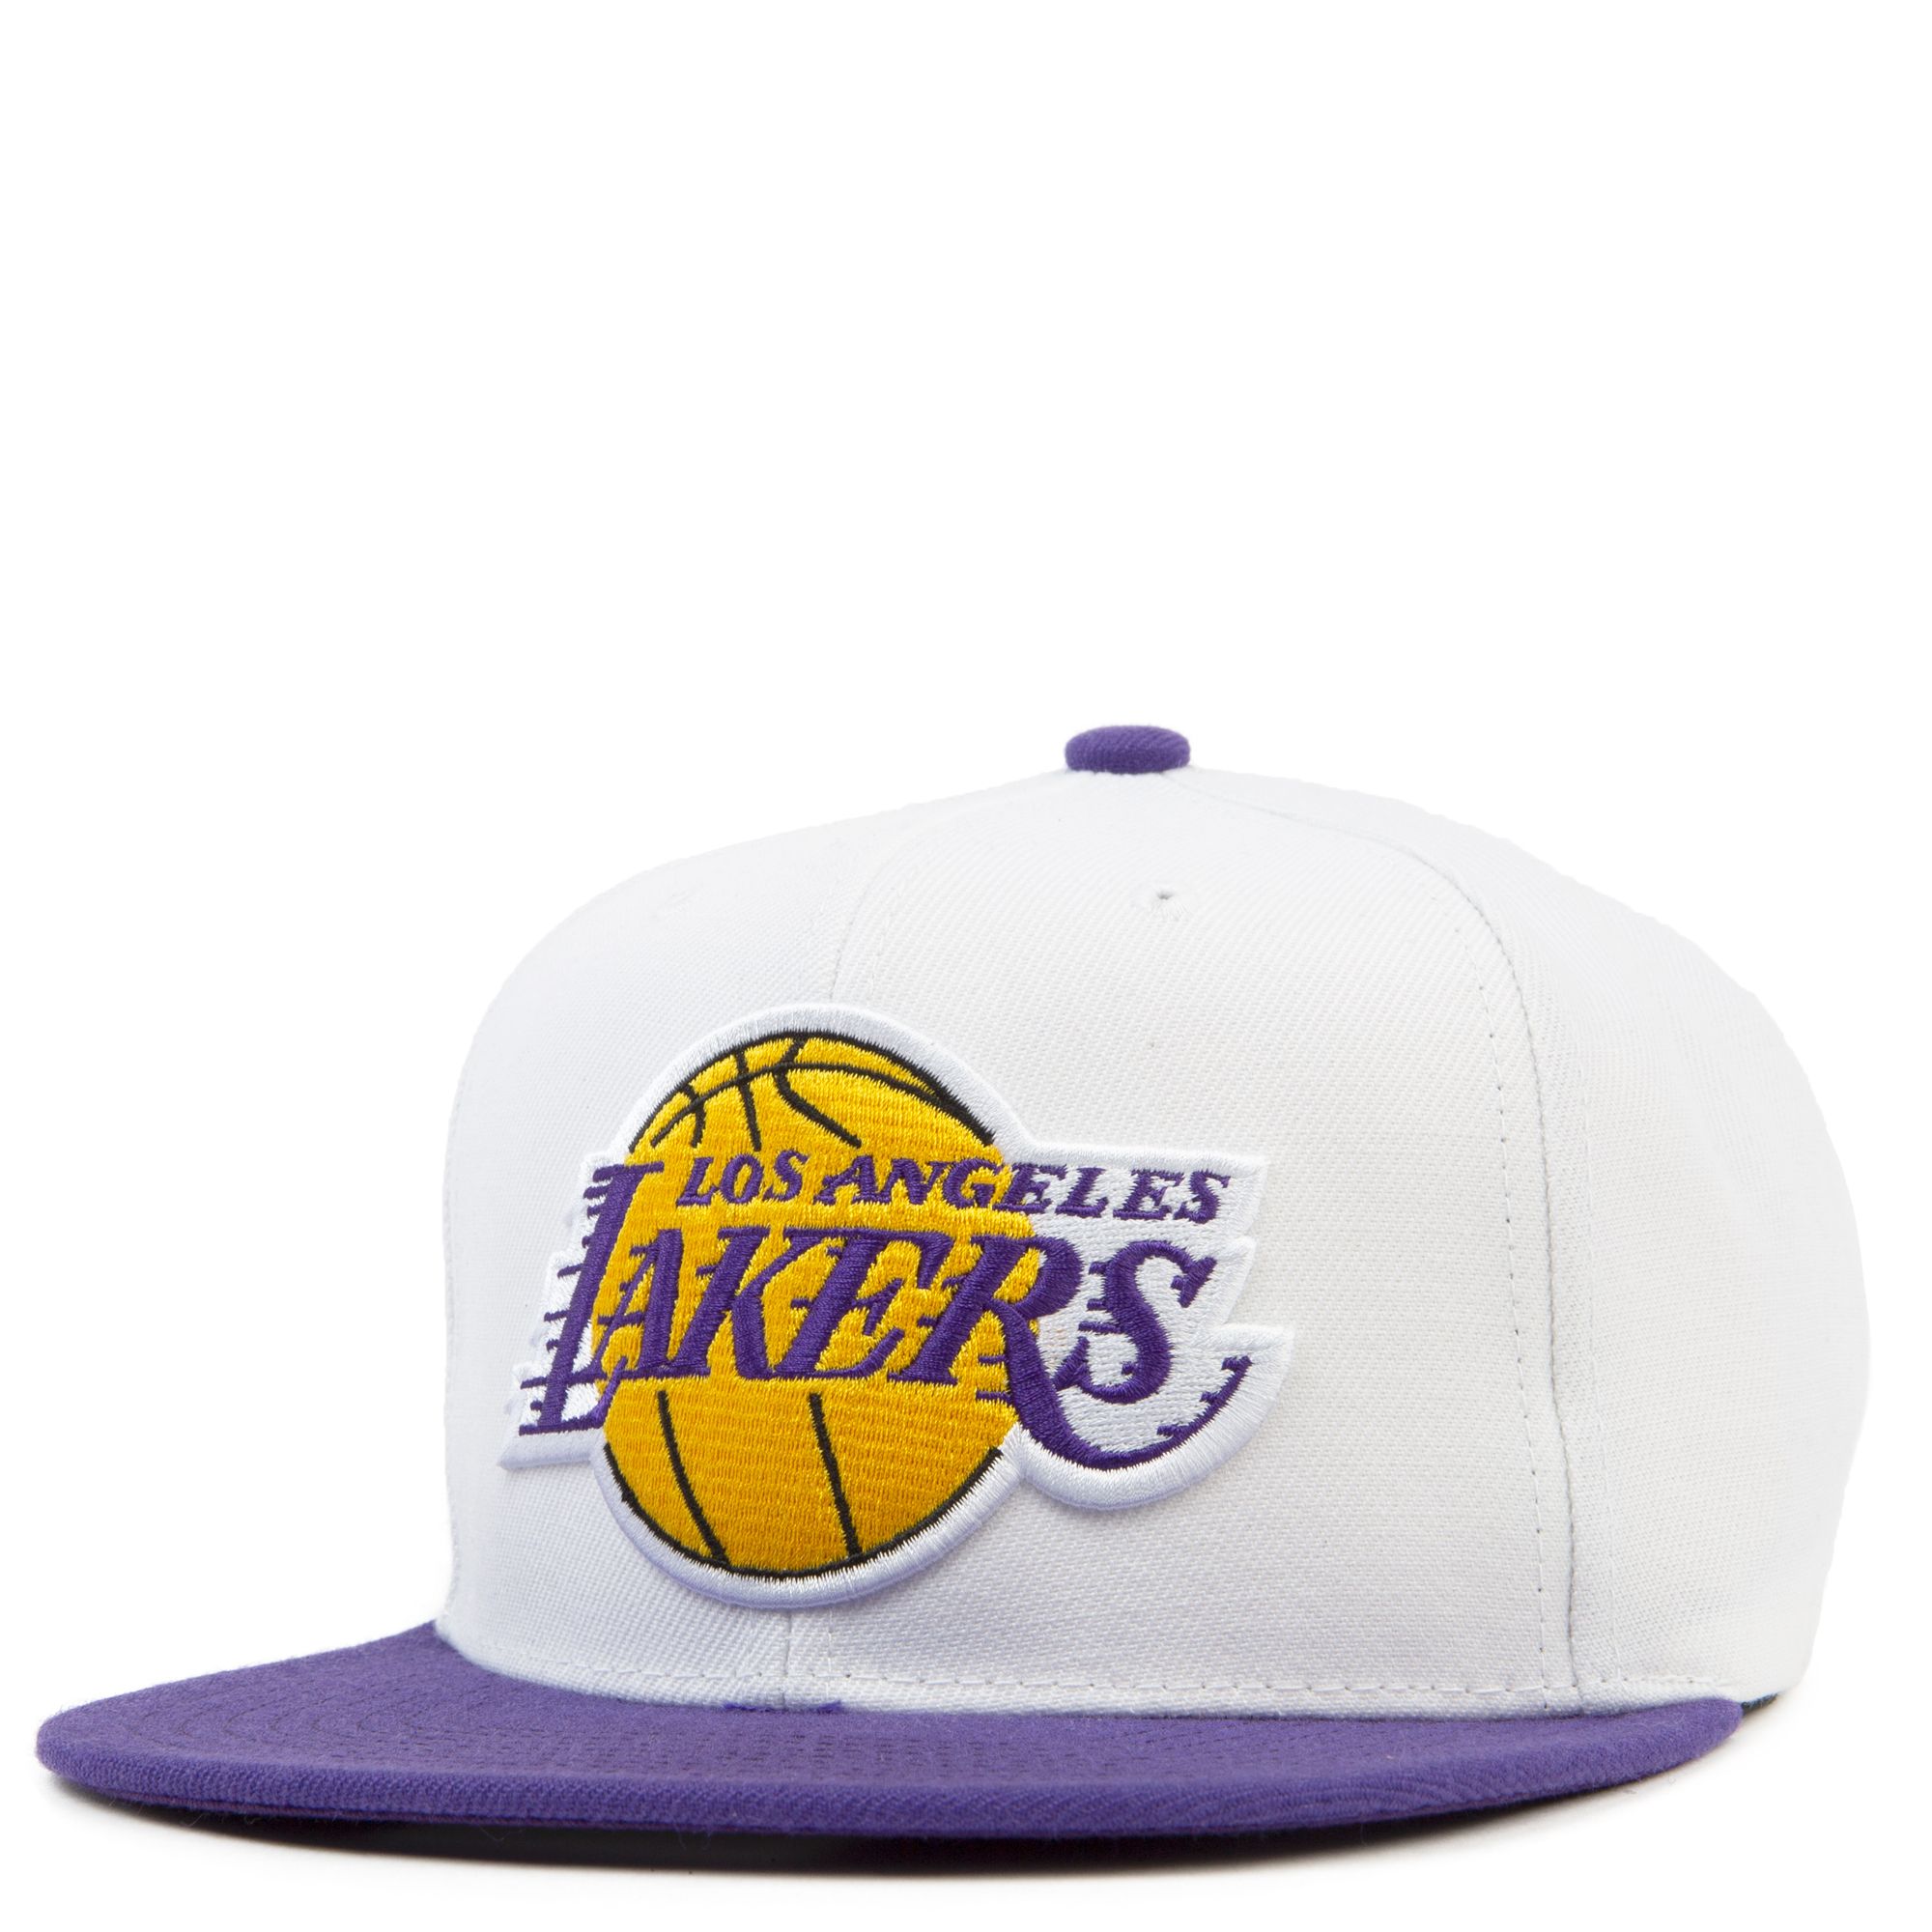 MITCHELL AND NESS Los Angeles Lakers Fresh Crown Snapback 6HSSMM19007 ...